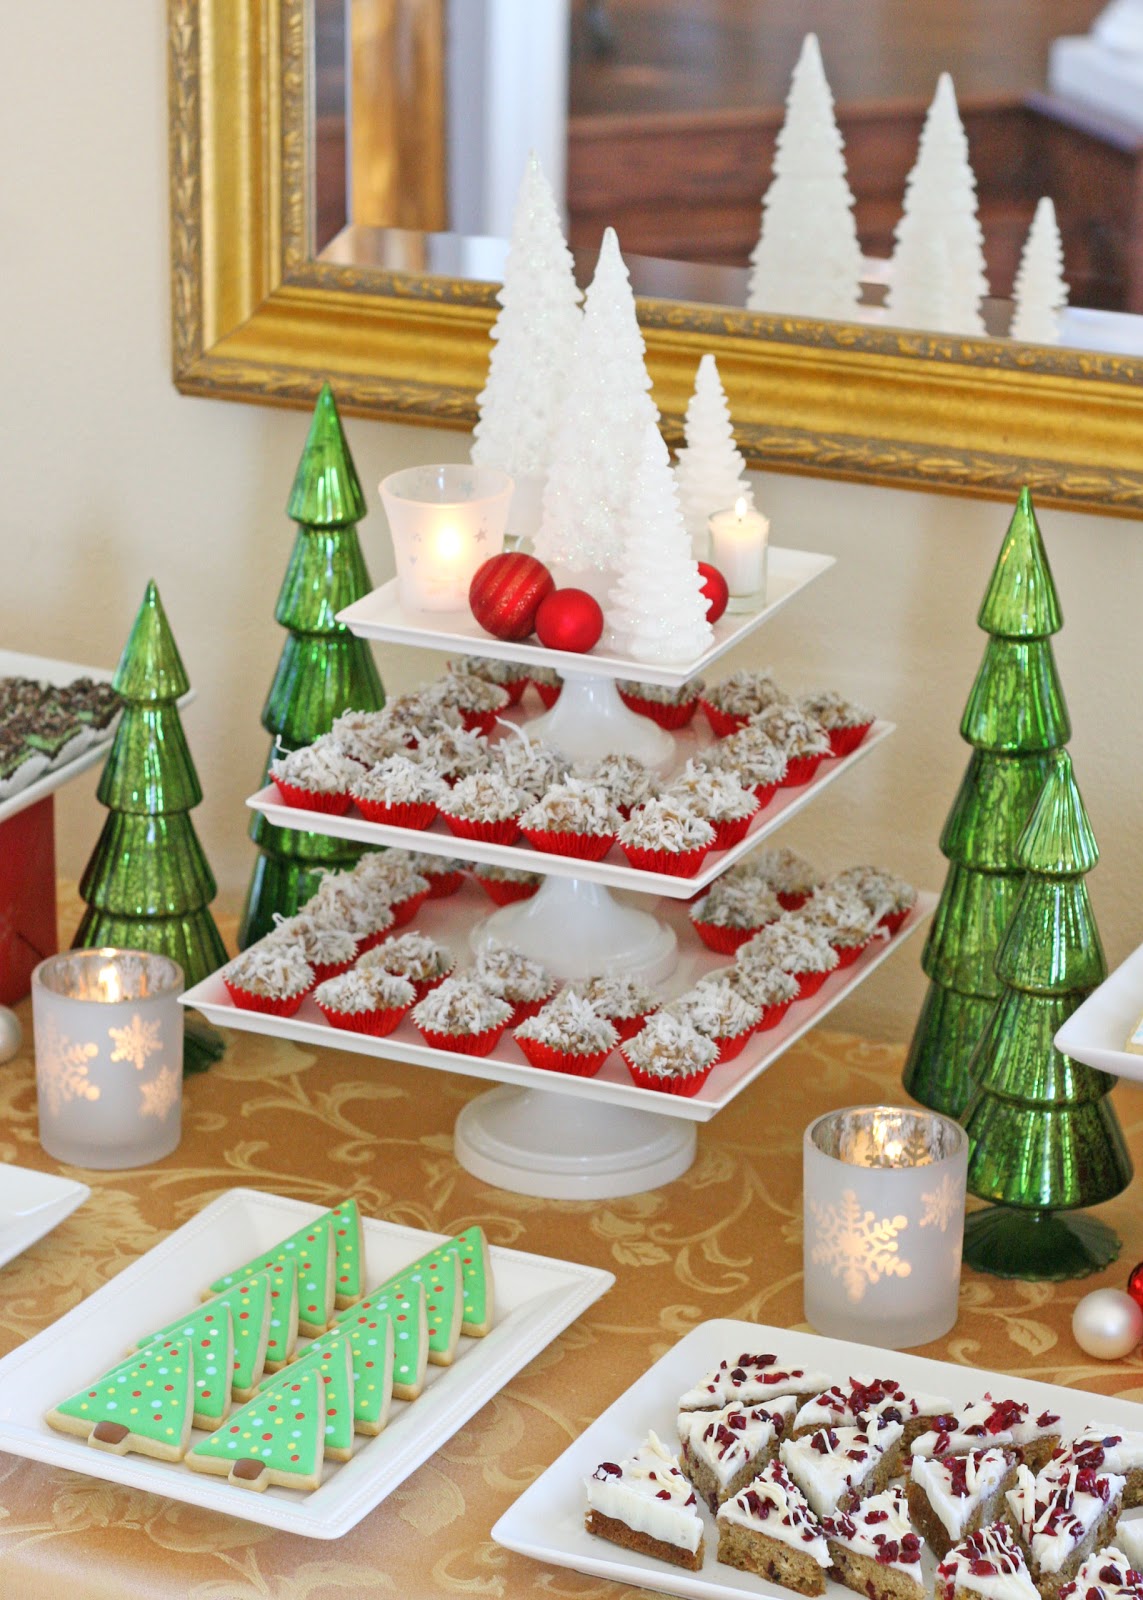 Classic Holiday Dessert Table - Glorious Treats